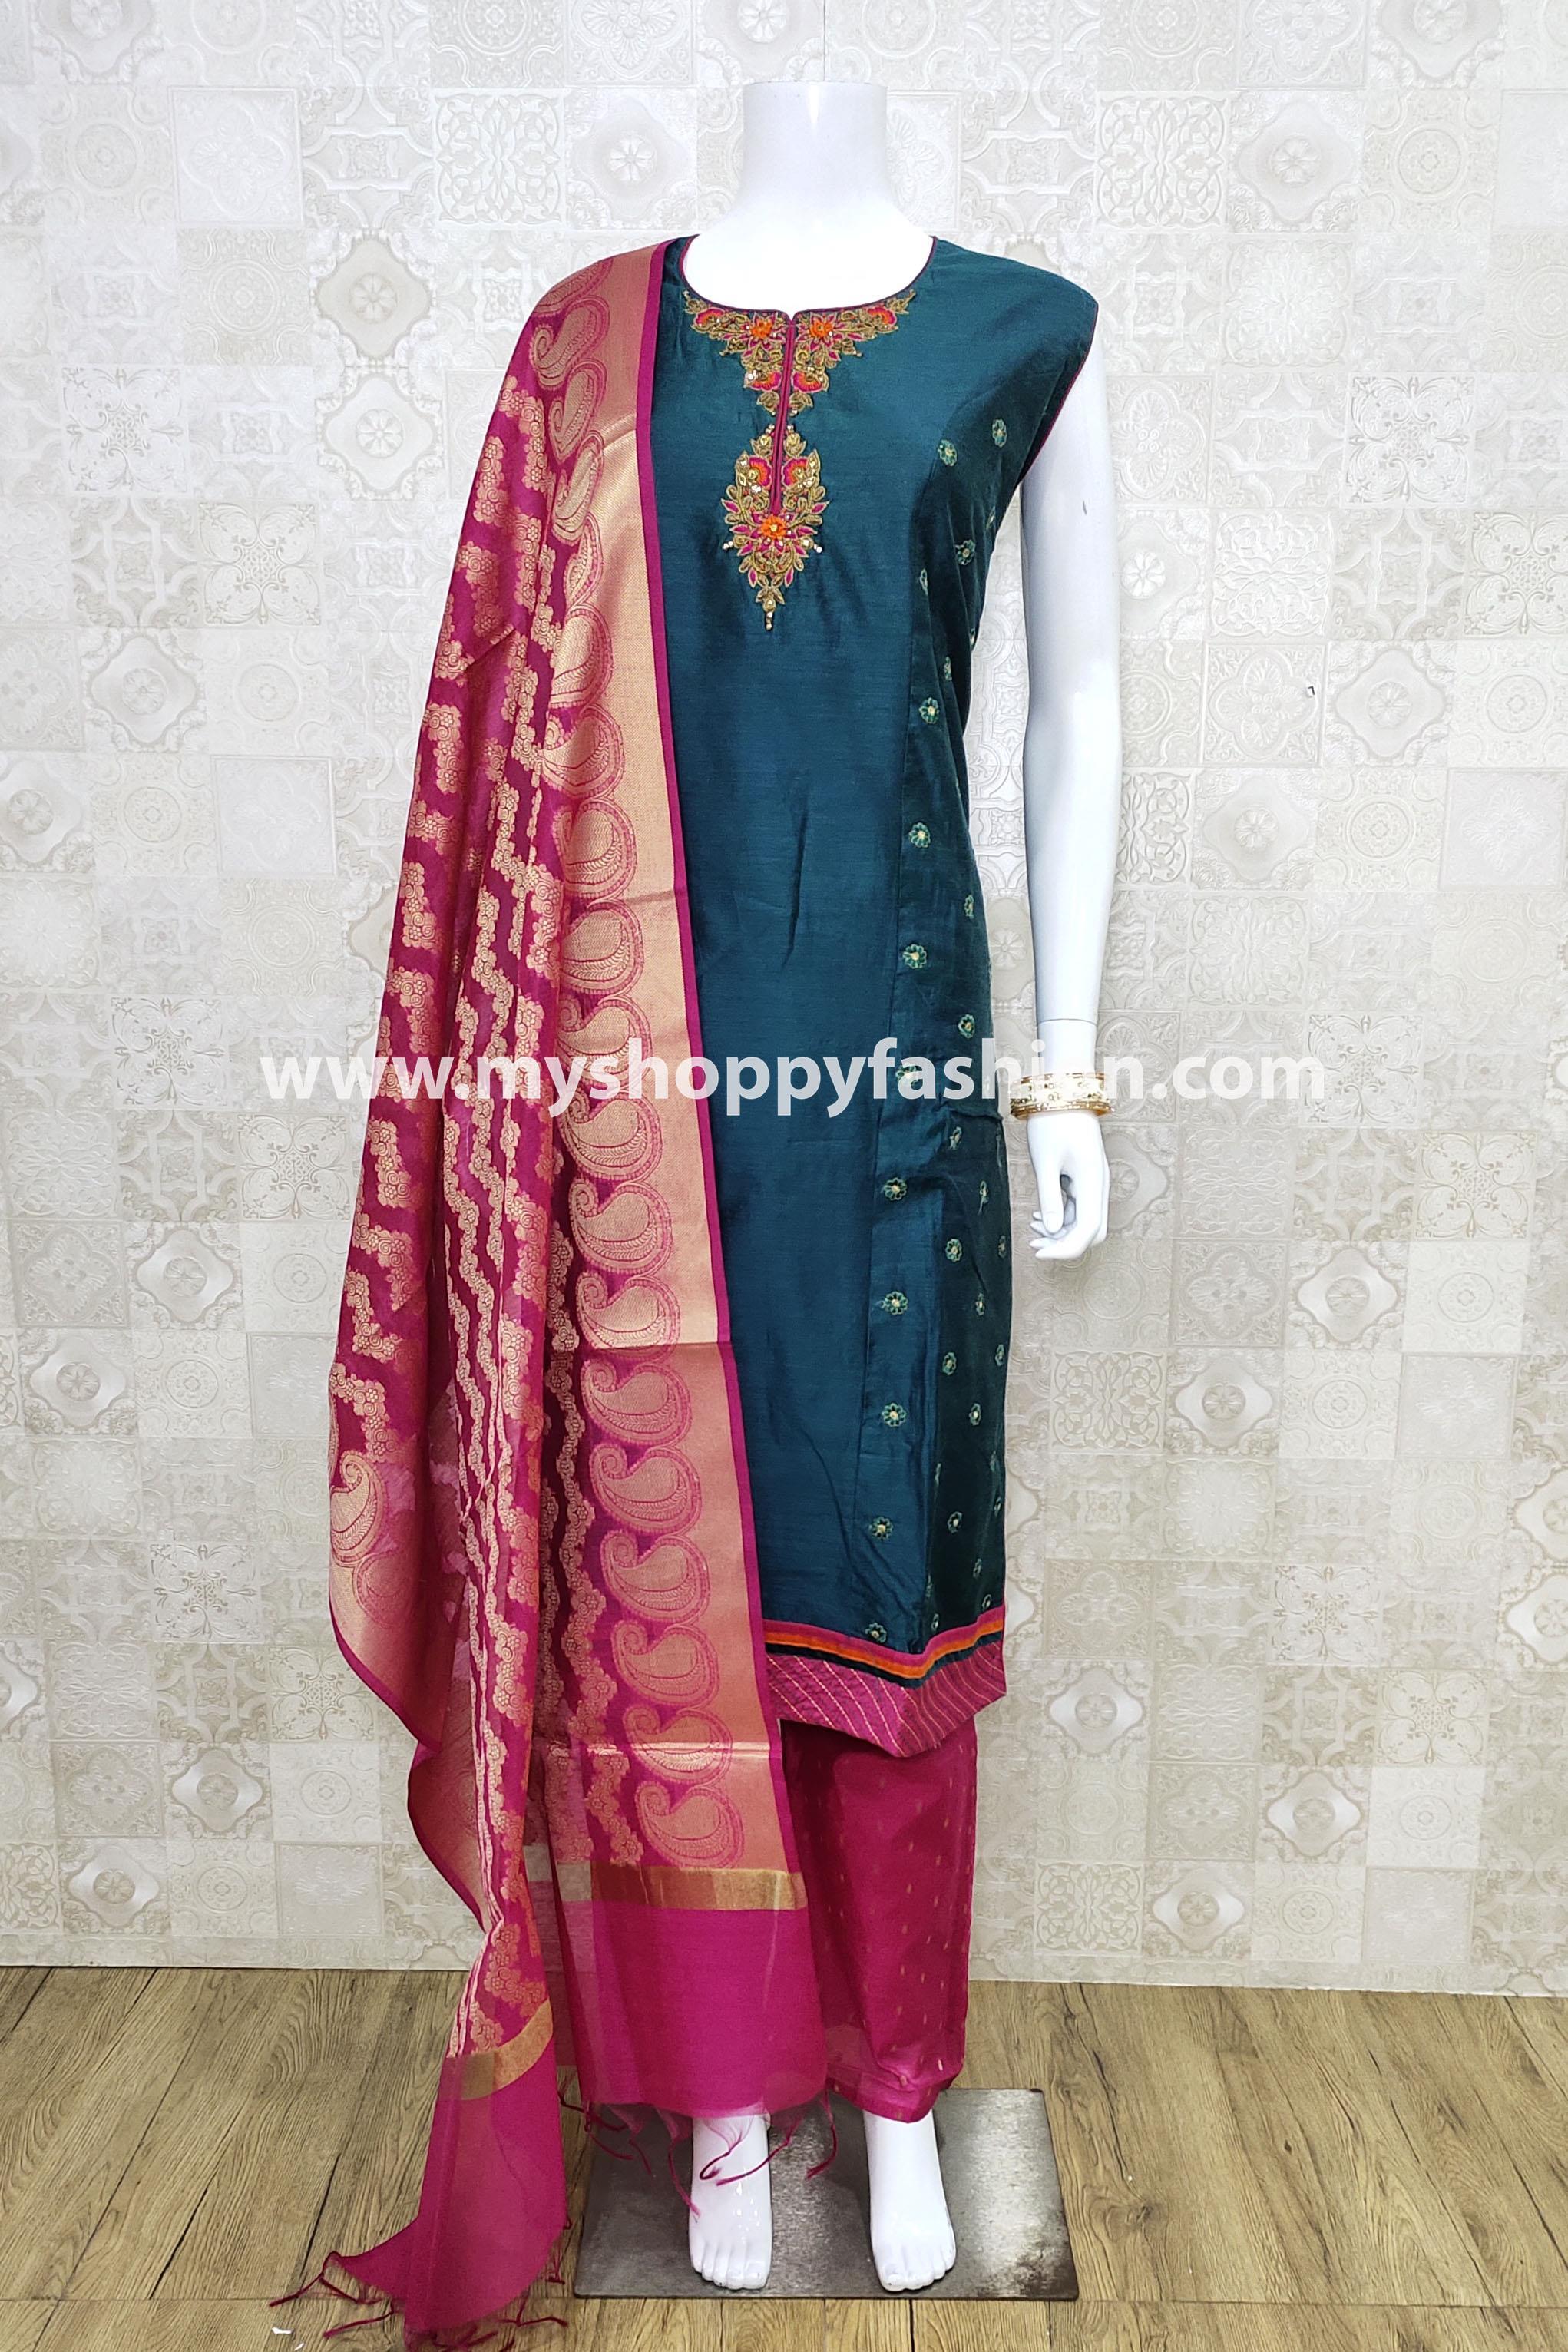 Photo of Light Green Patiala Suit with Hot Pink Dupatta | Combination  dresses, Light green dress, Dress indian style